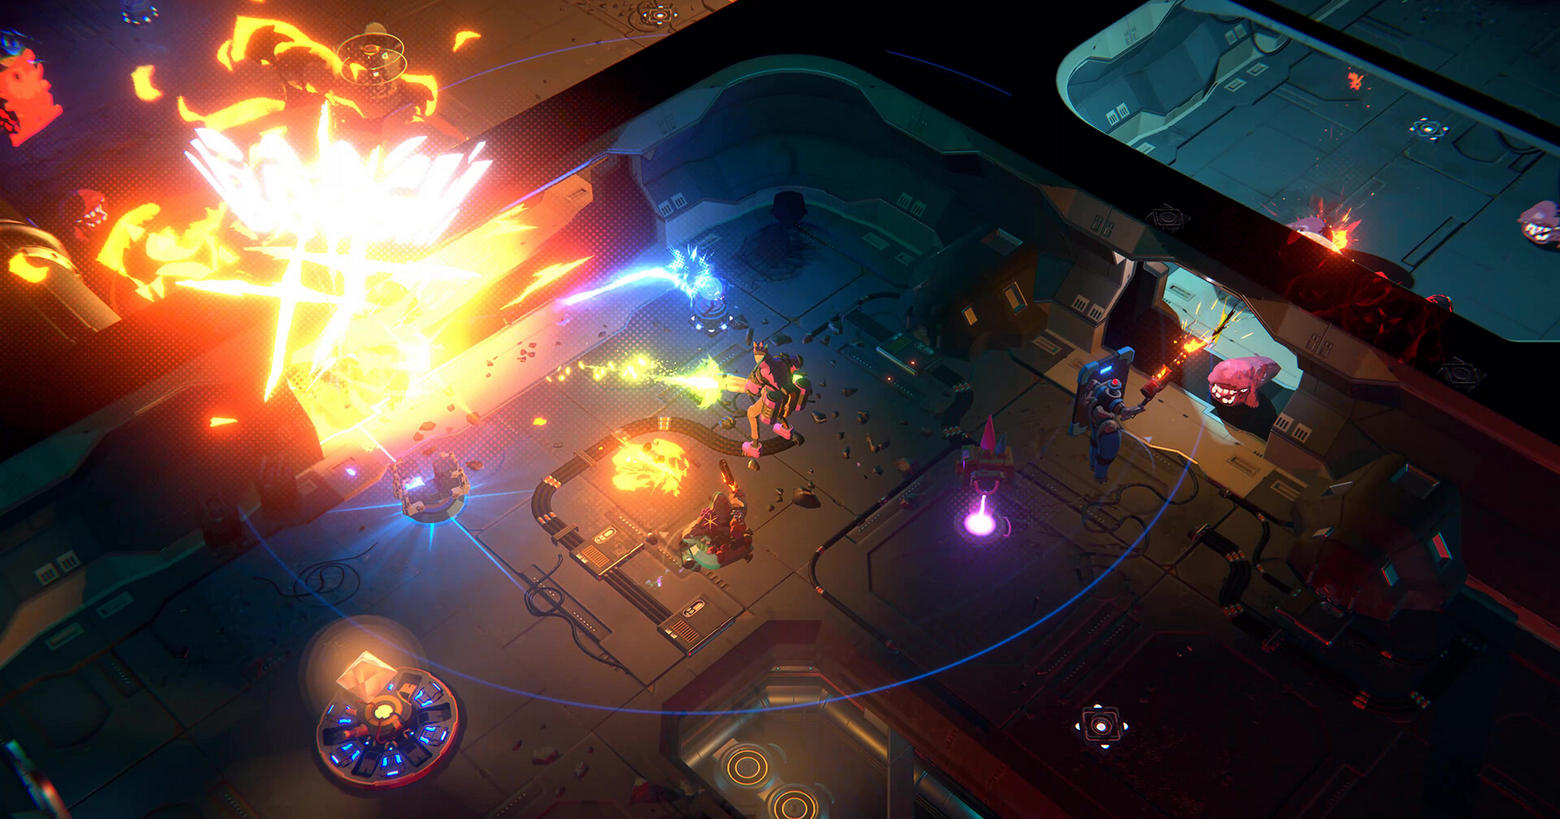 In the top-down view, we see several players in Endless Dungeon fighting monsters in a spaceship. A release date is known.